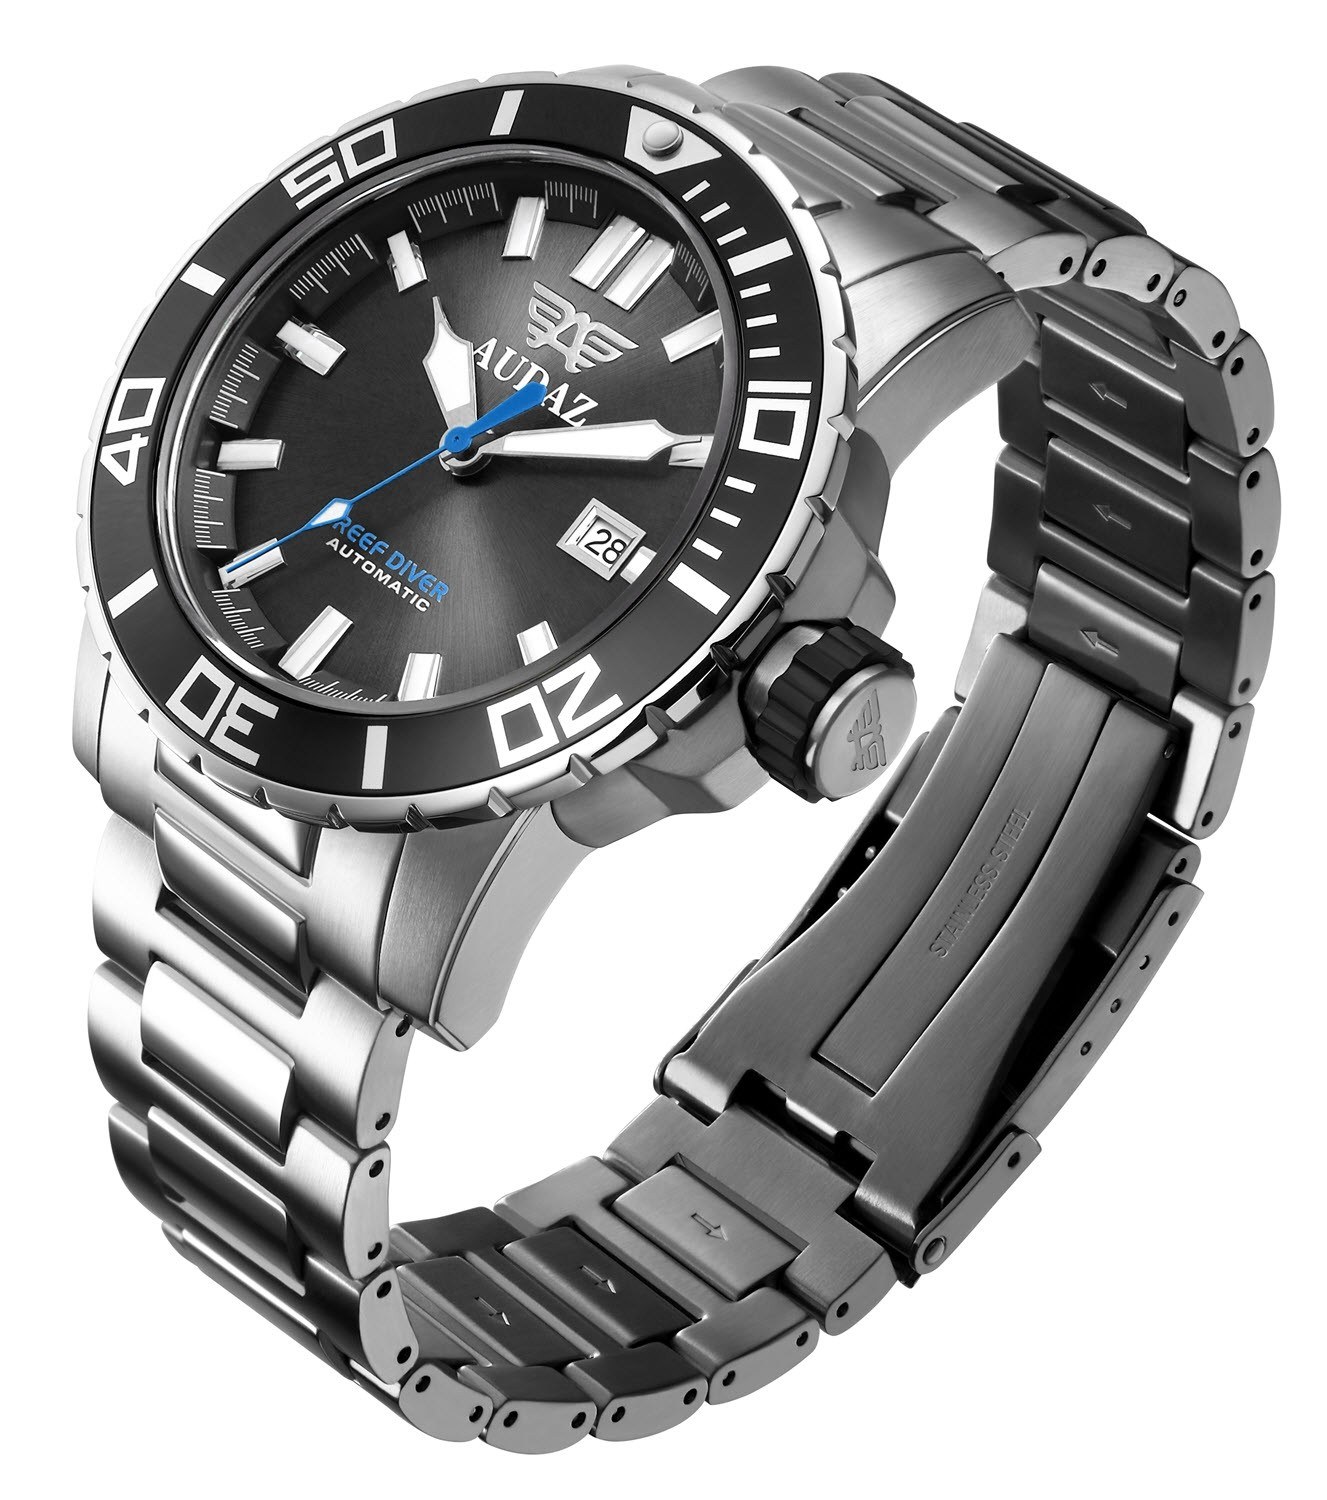 Audaz Reef Diver Gray Sunray Men's Diver Automatic Watch 45mm ADZ-2040-03 - Click Image to Close